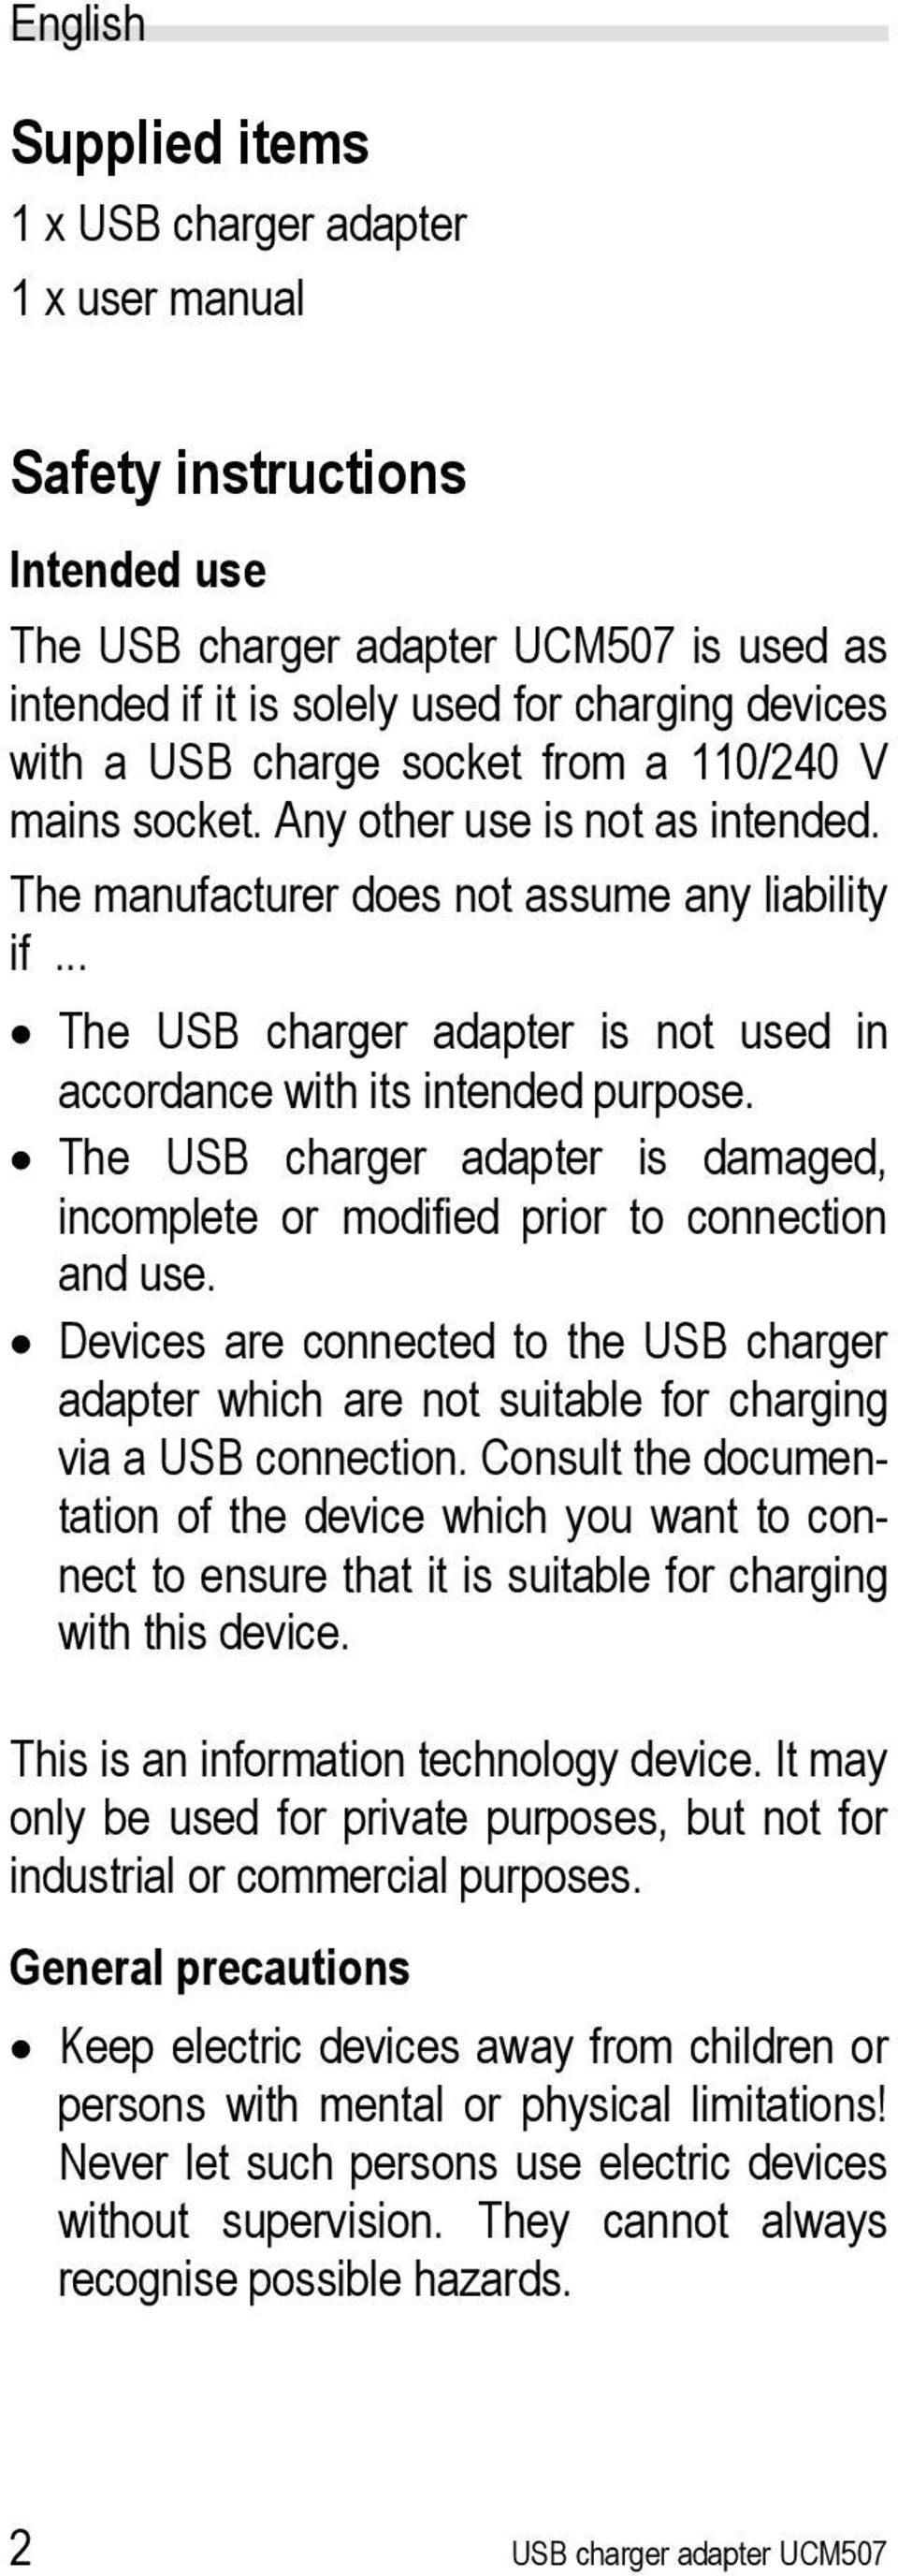 .. The USB charger adapter is not used in accordance with its intended purpose. The USB charger adapter is damaged, incomplete or modified prior to connection and use.